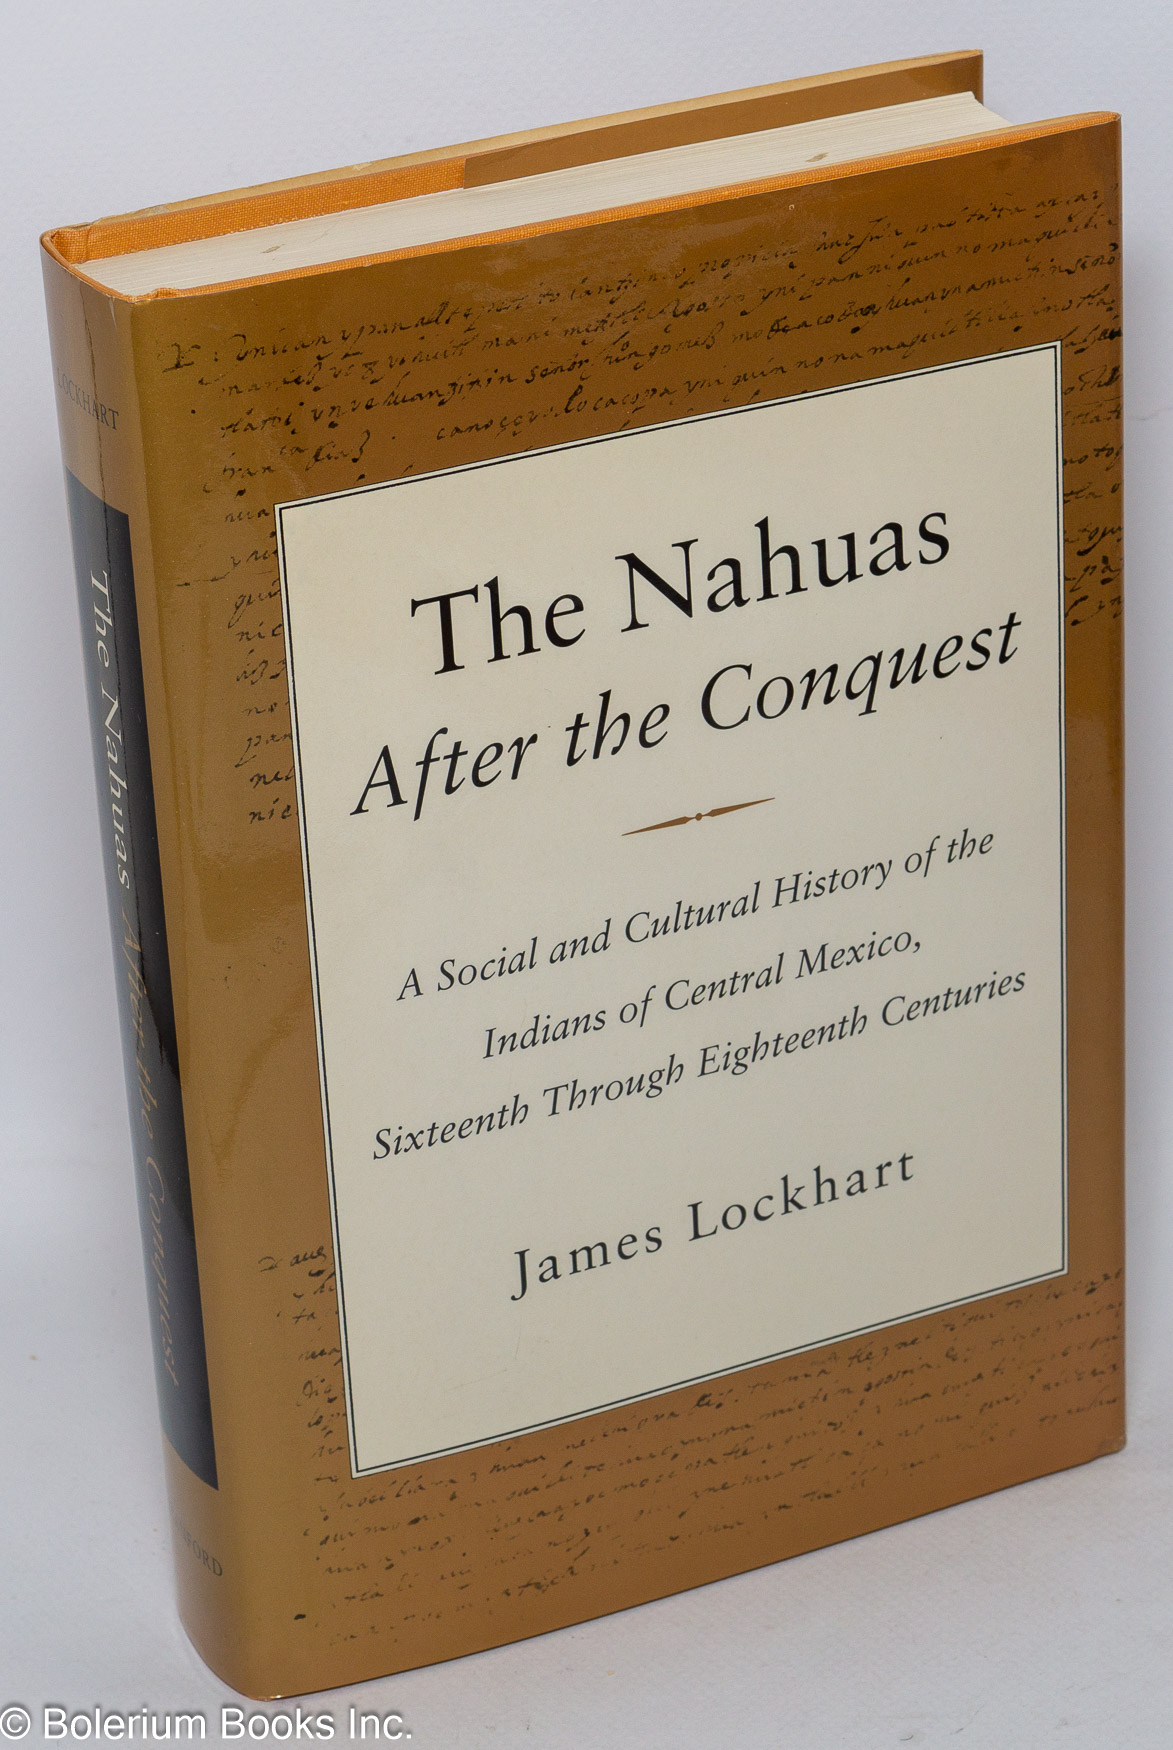 The Nahuas after the Conquest: A Social and Cultural History of the Indians of Central Mexico, Sixteenth Through Eighteenth Centuries - Lockhart, James